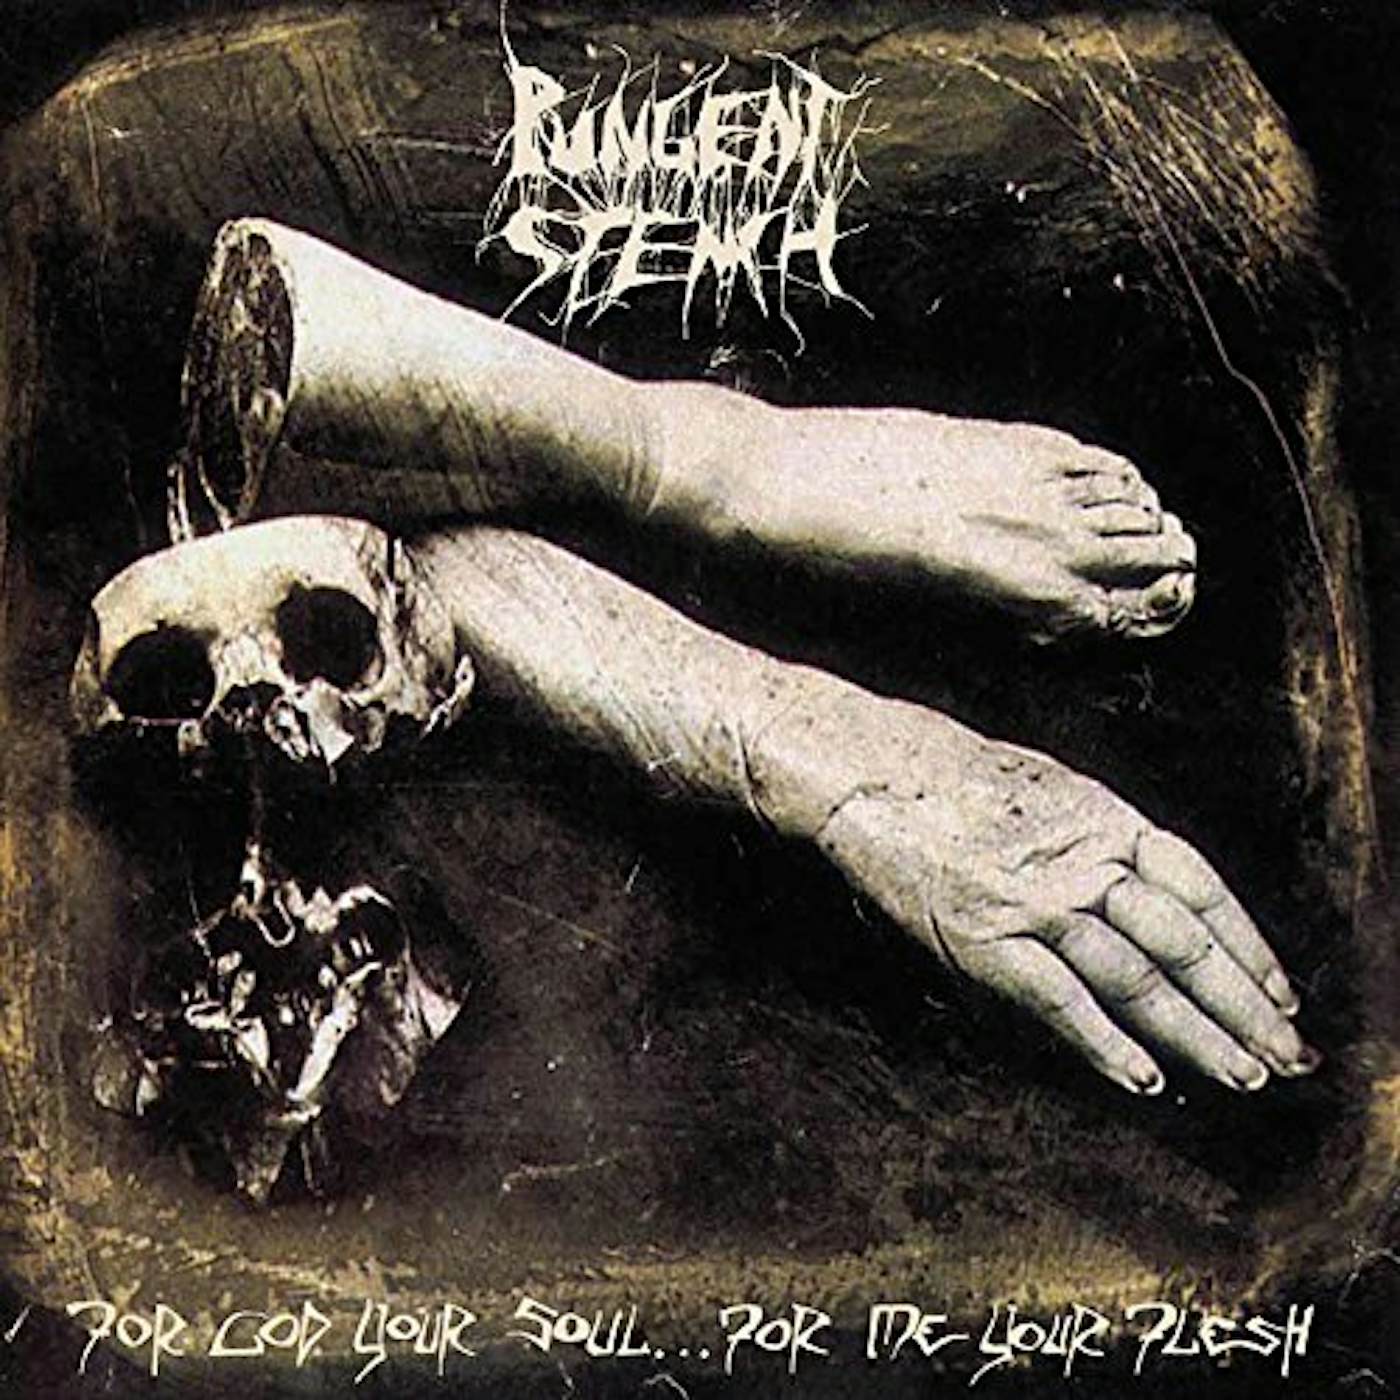 Pungent Stench FOR GOD YOUR SOUL FOR ME YOUR FLESH CD